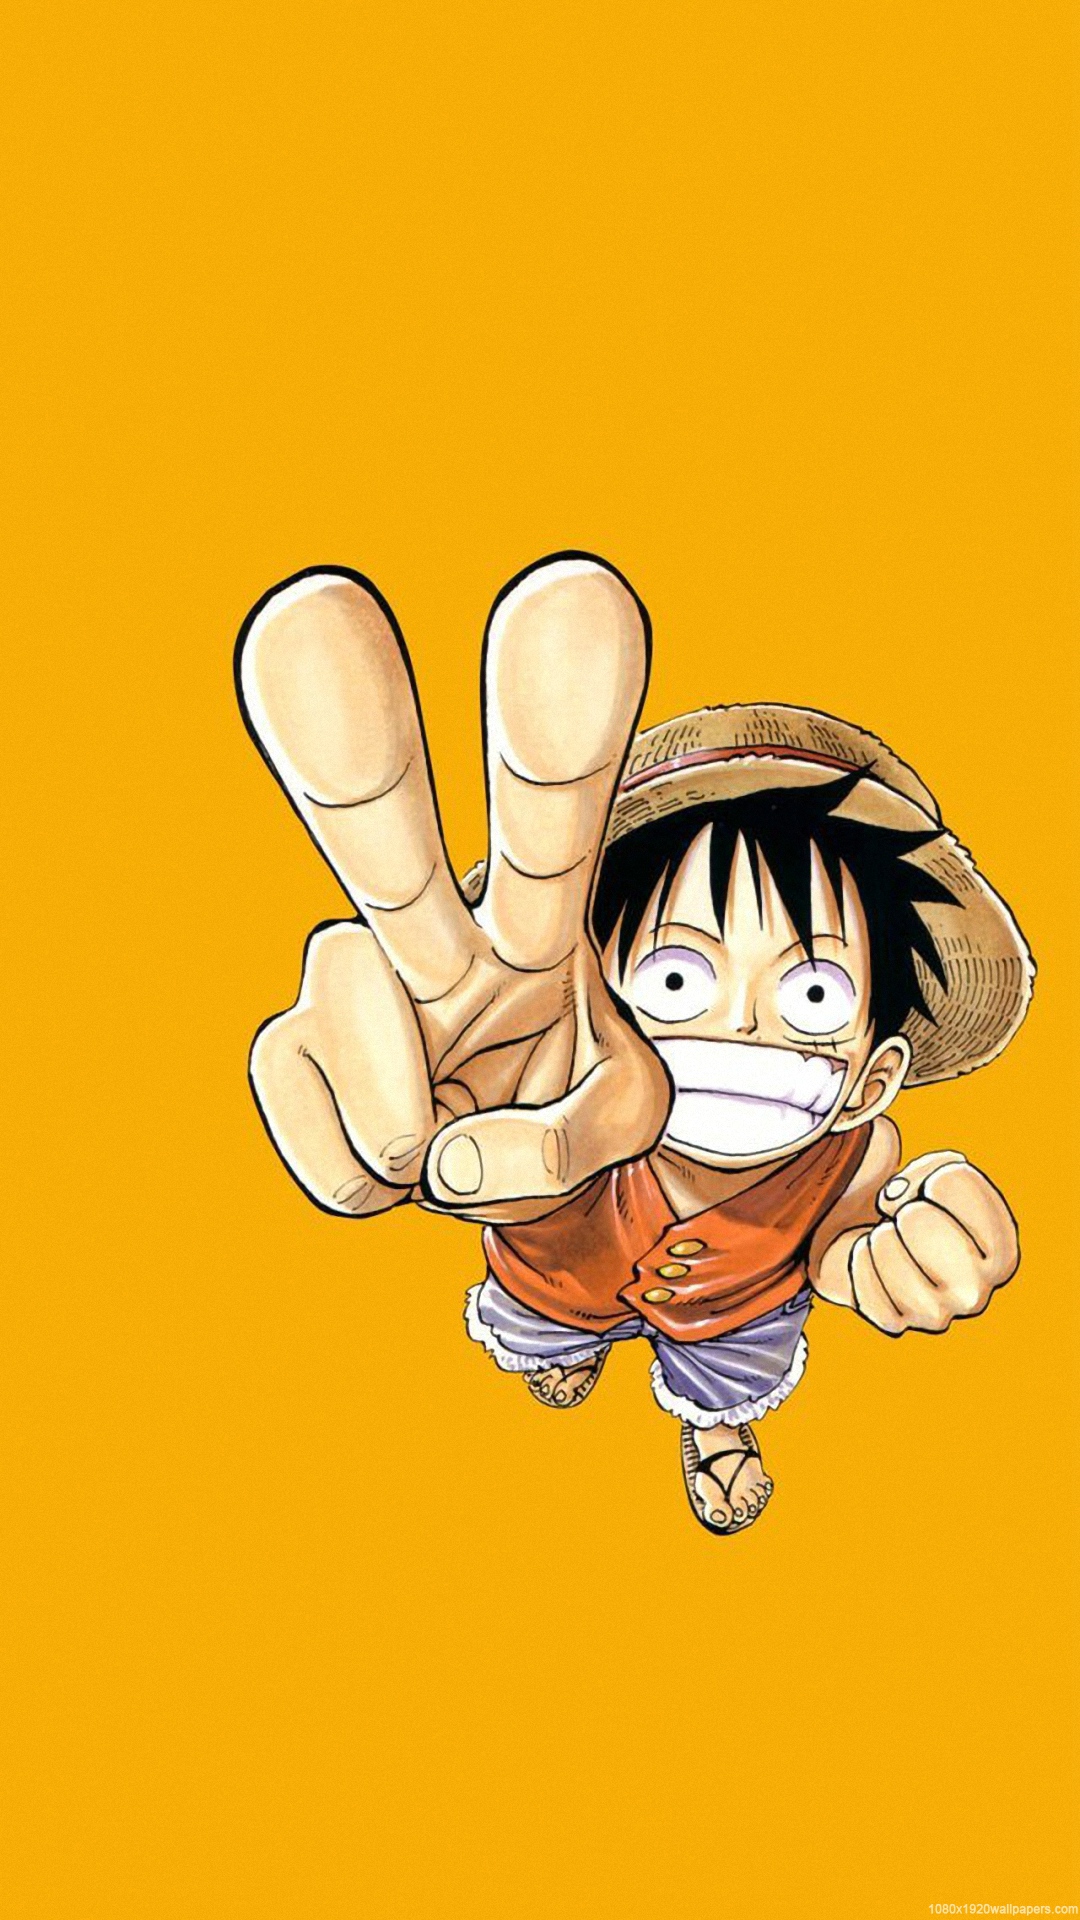 Hd Wallpapers For Mobile One Piece